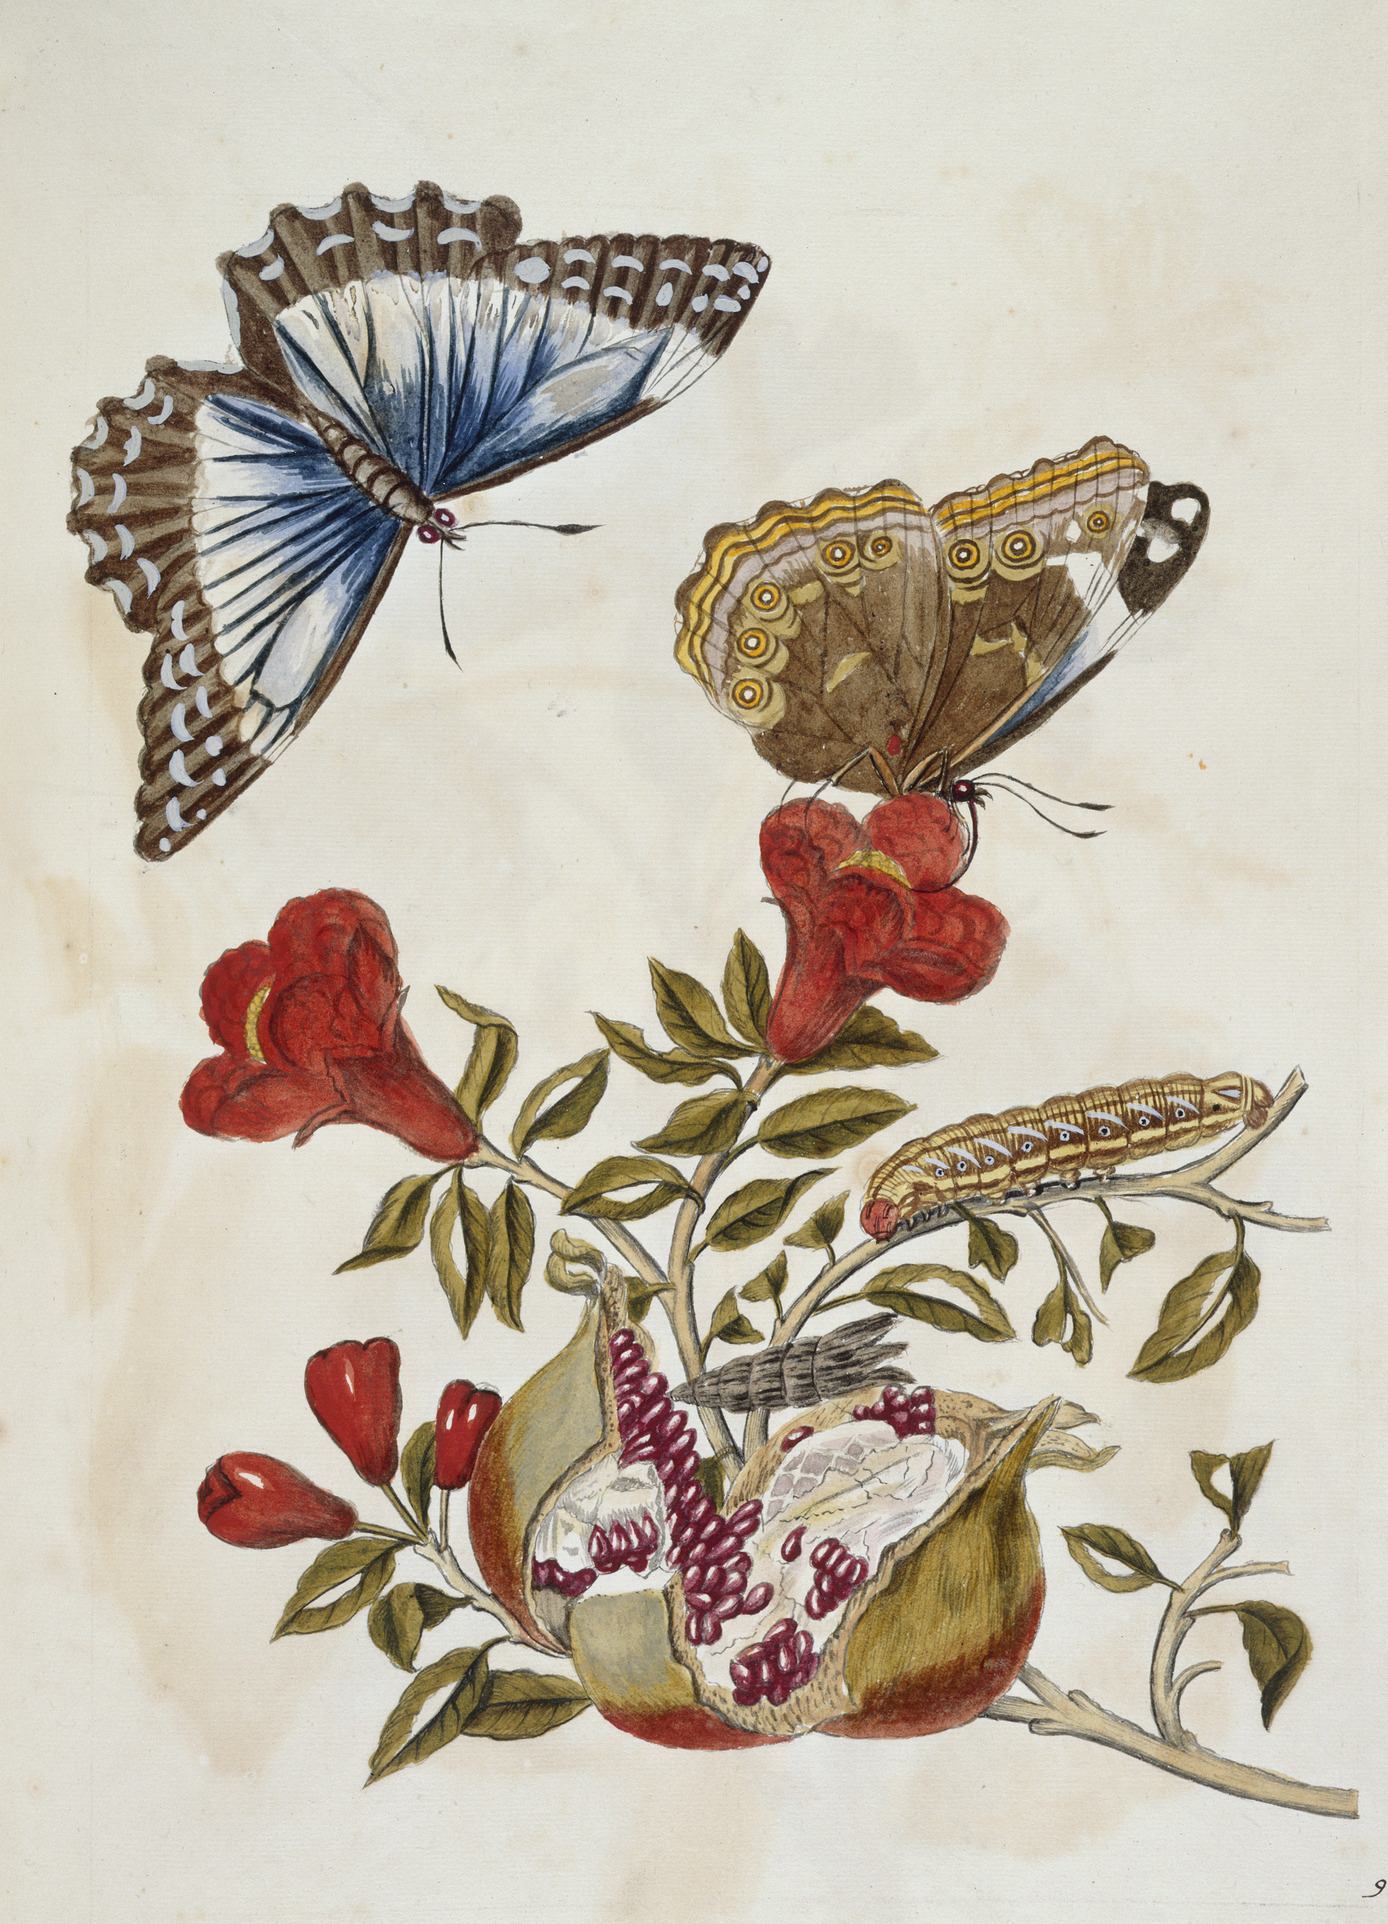 An illustration of butterflies and caterpillars perched on flowers